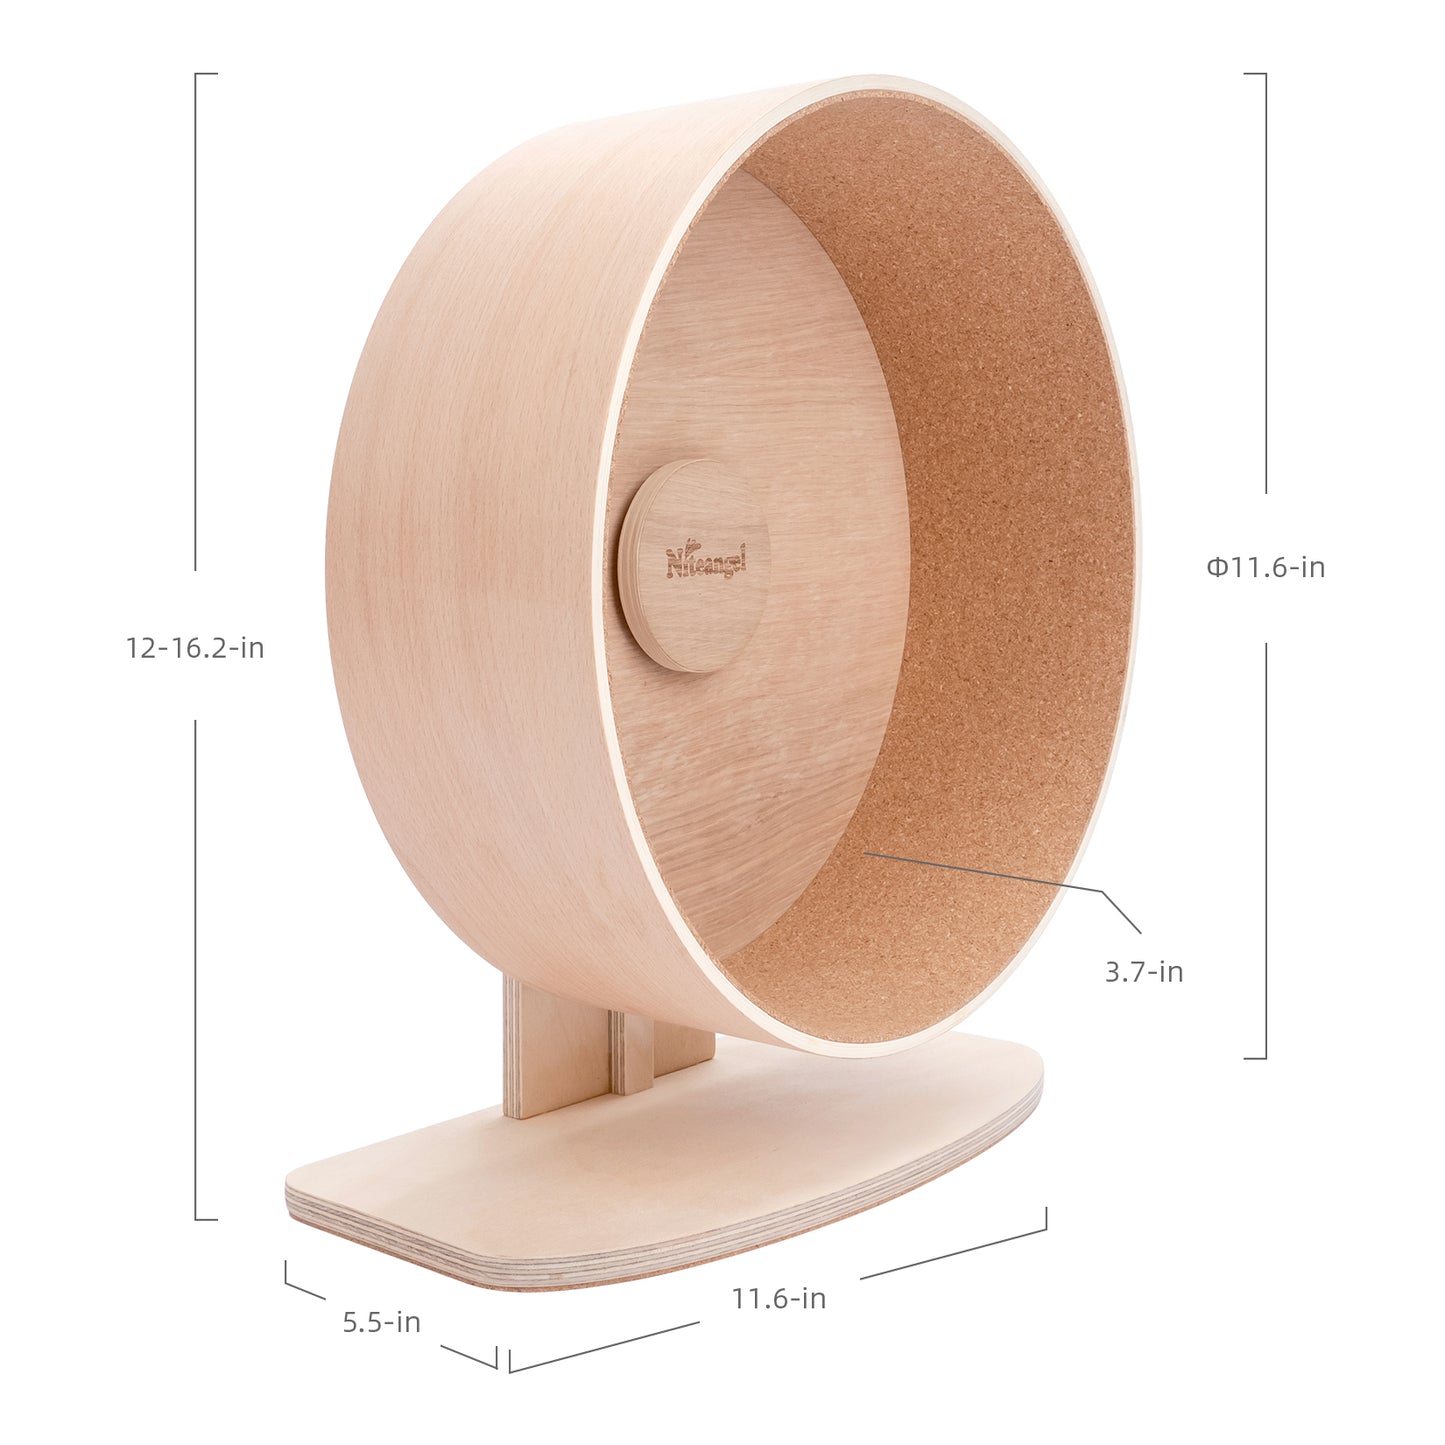 Niteangel Wooden Hamster Exercise Wheel: - Silent Hamster Running Wheel for Hamsters Gerbil Mice and Other Similar-Sized Small Pets (L)